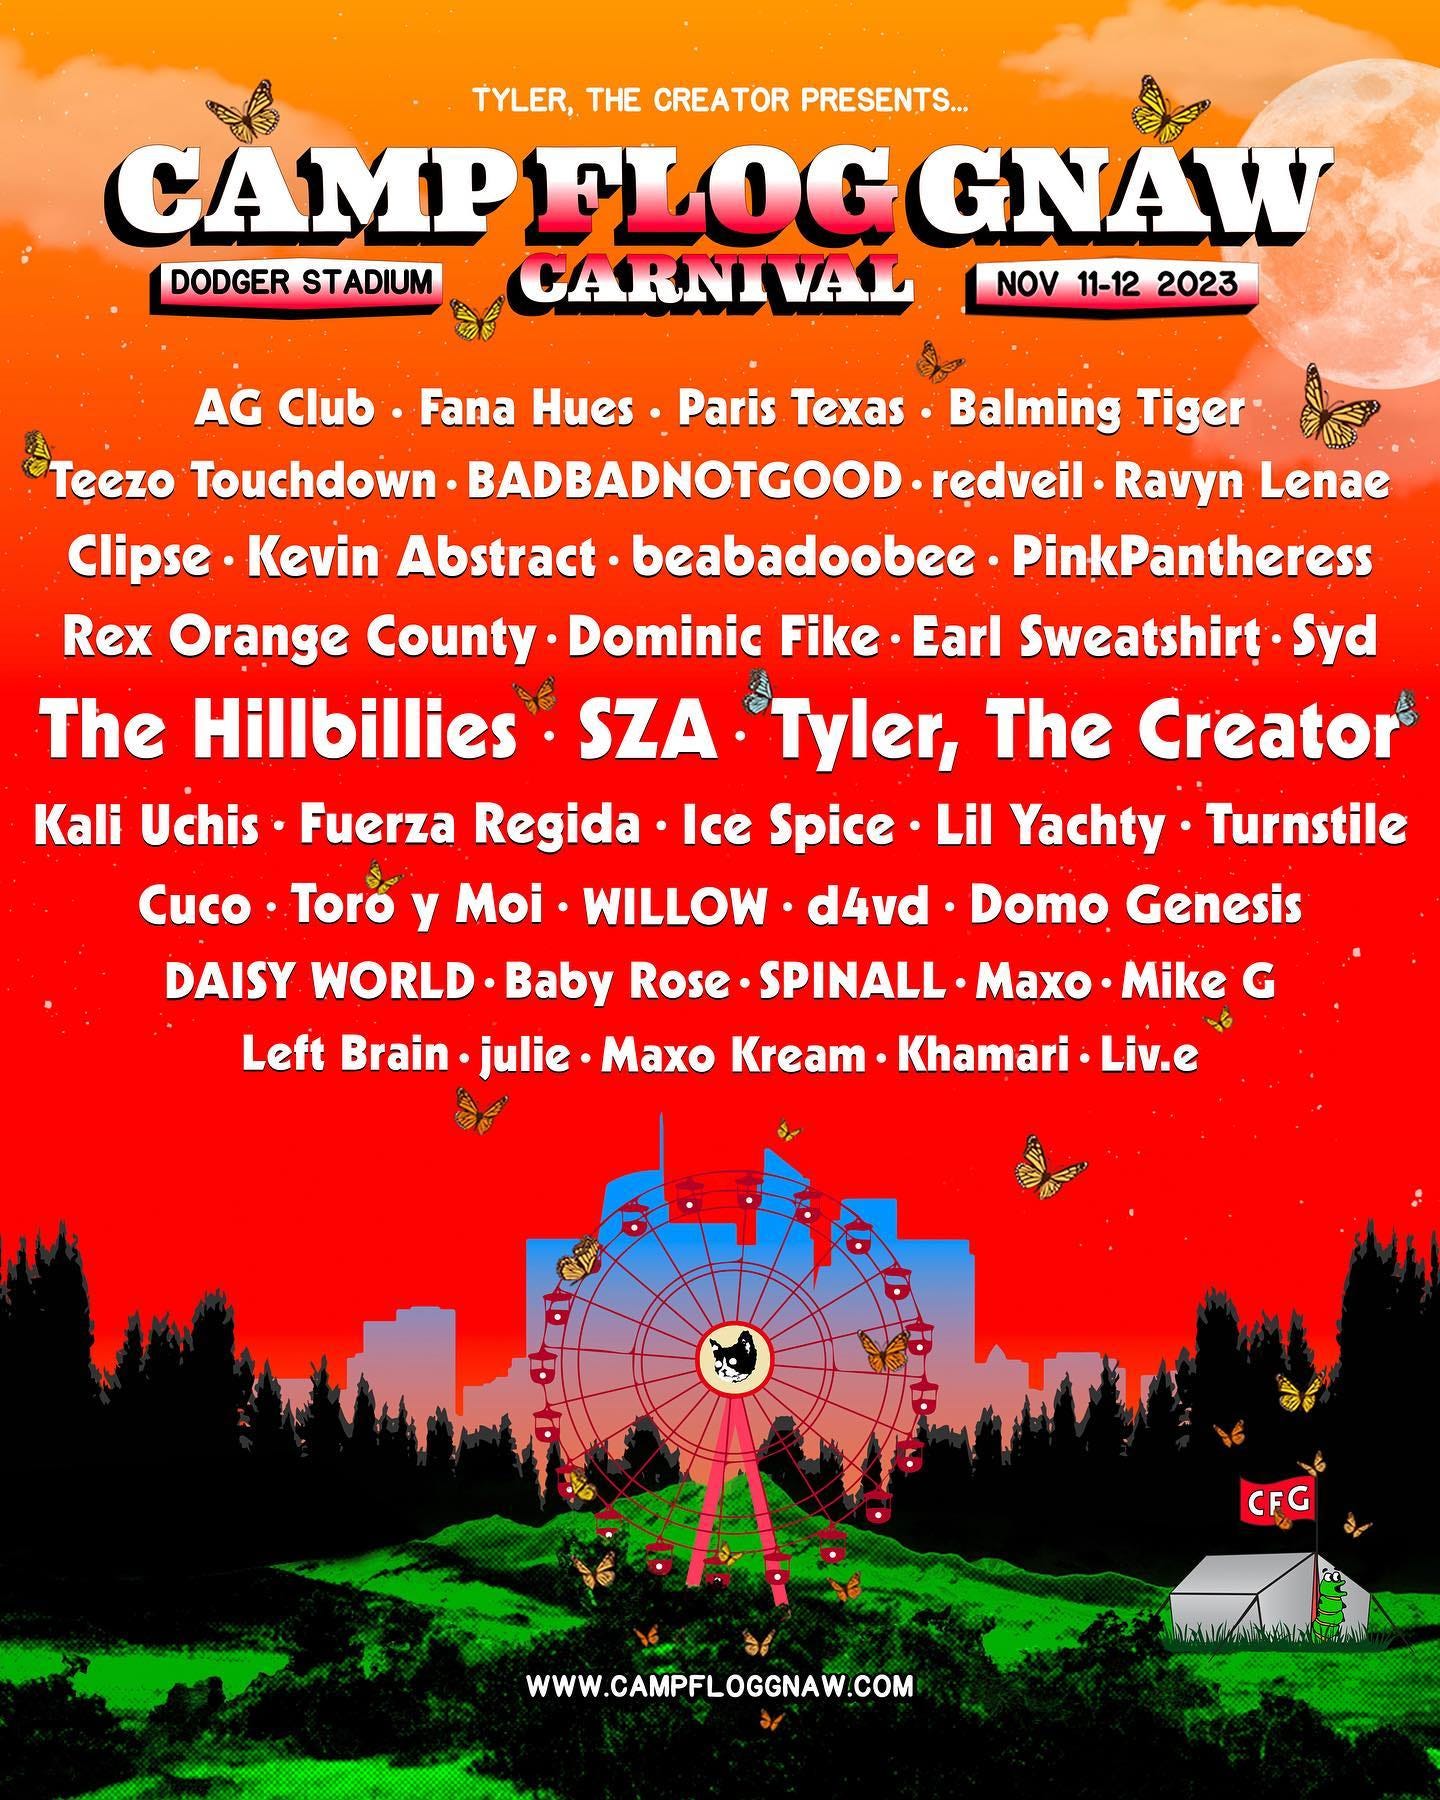 Tyler, the Creator, Clipse, SZA, and More Set for Camp Flog Gnaw Carnival  2023 | Pitchfork